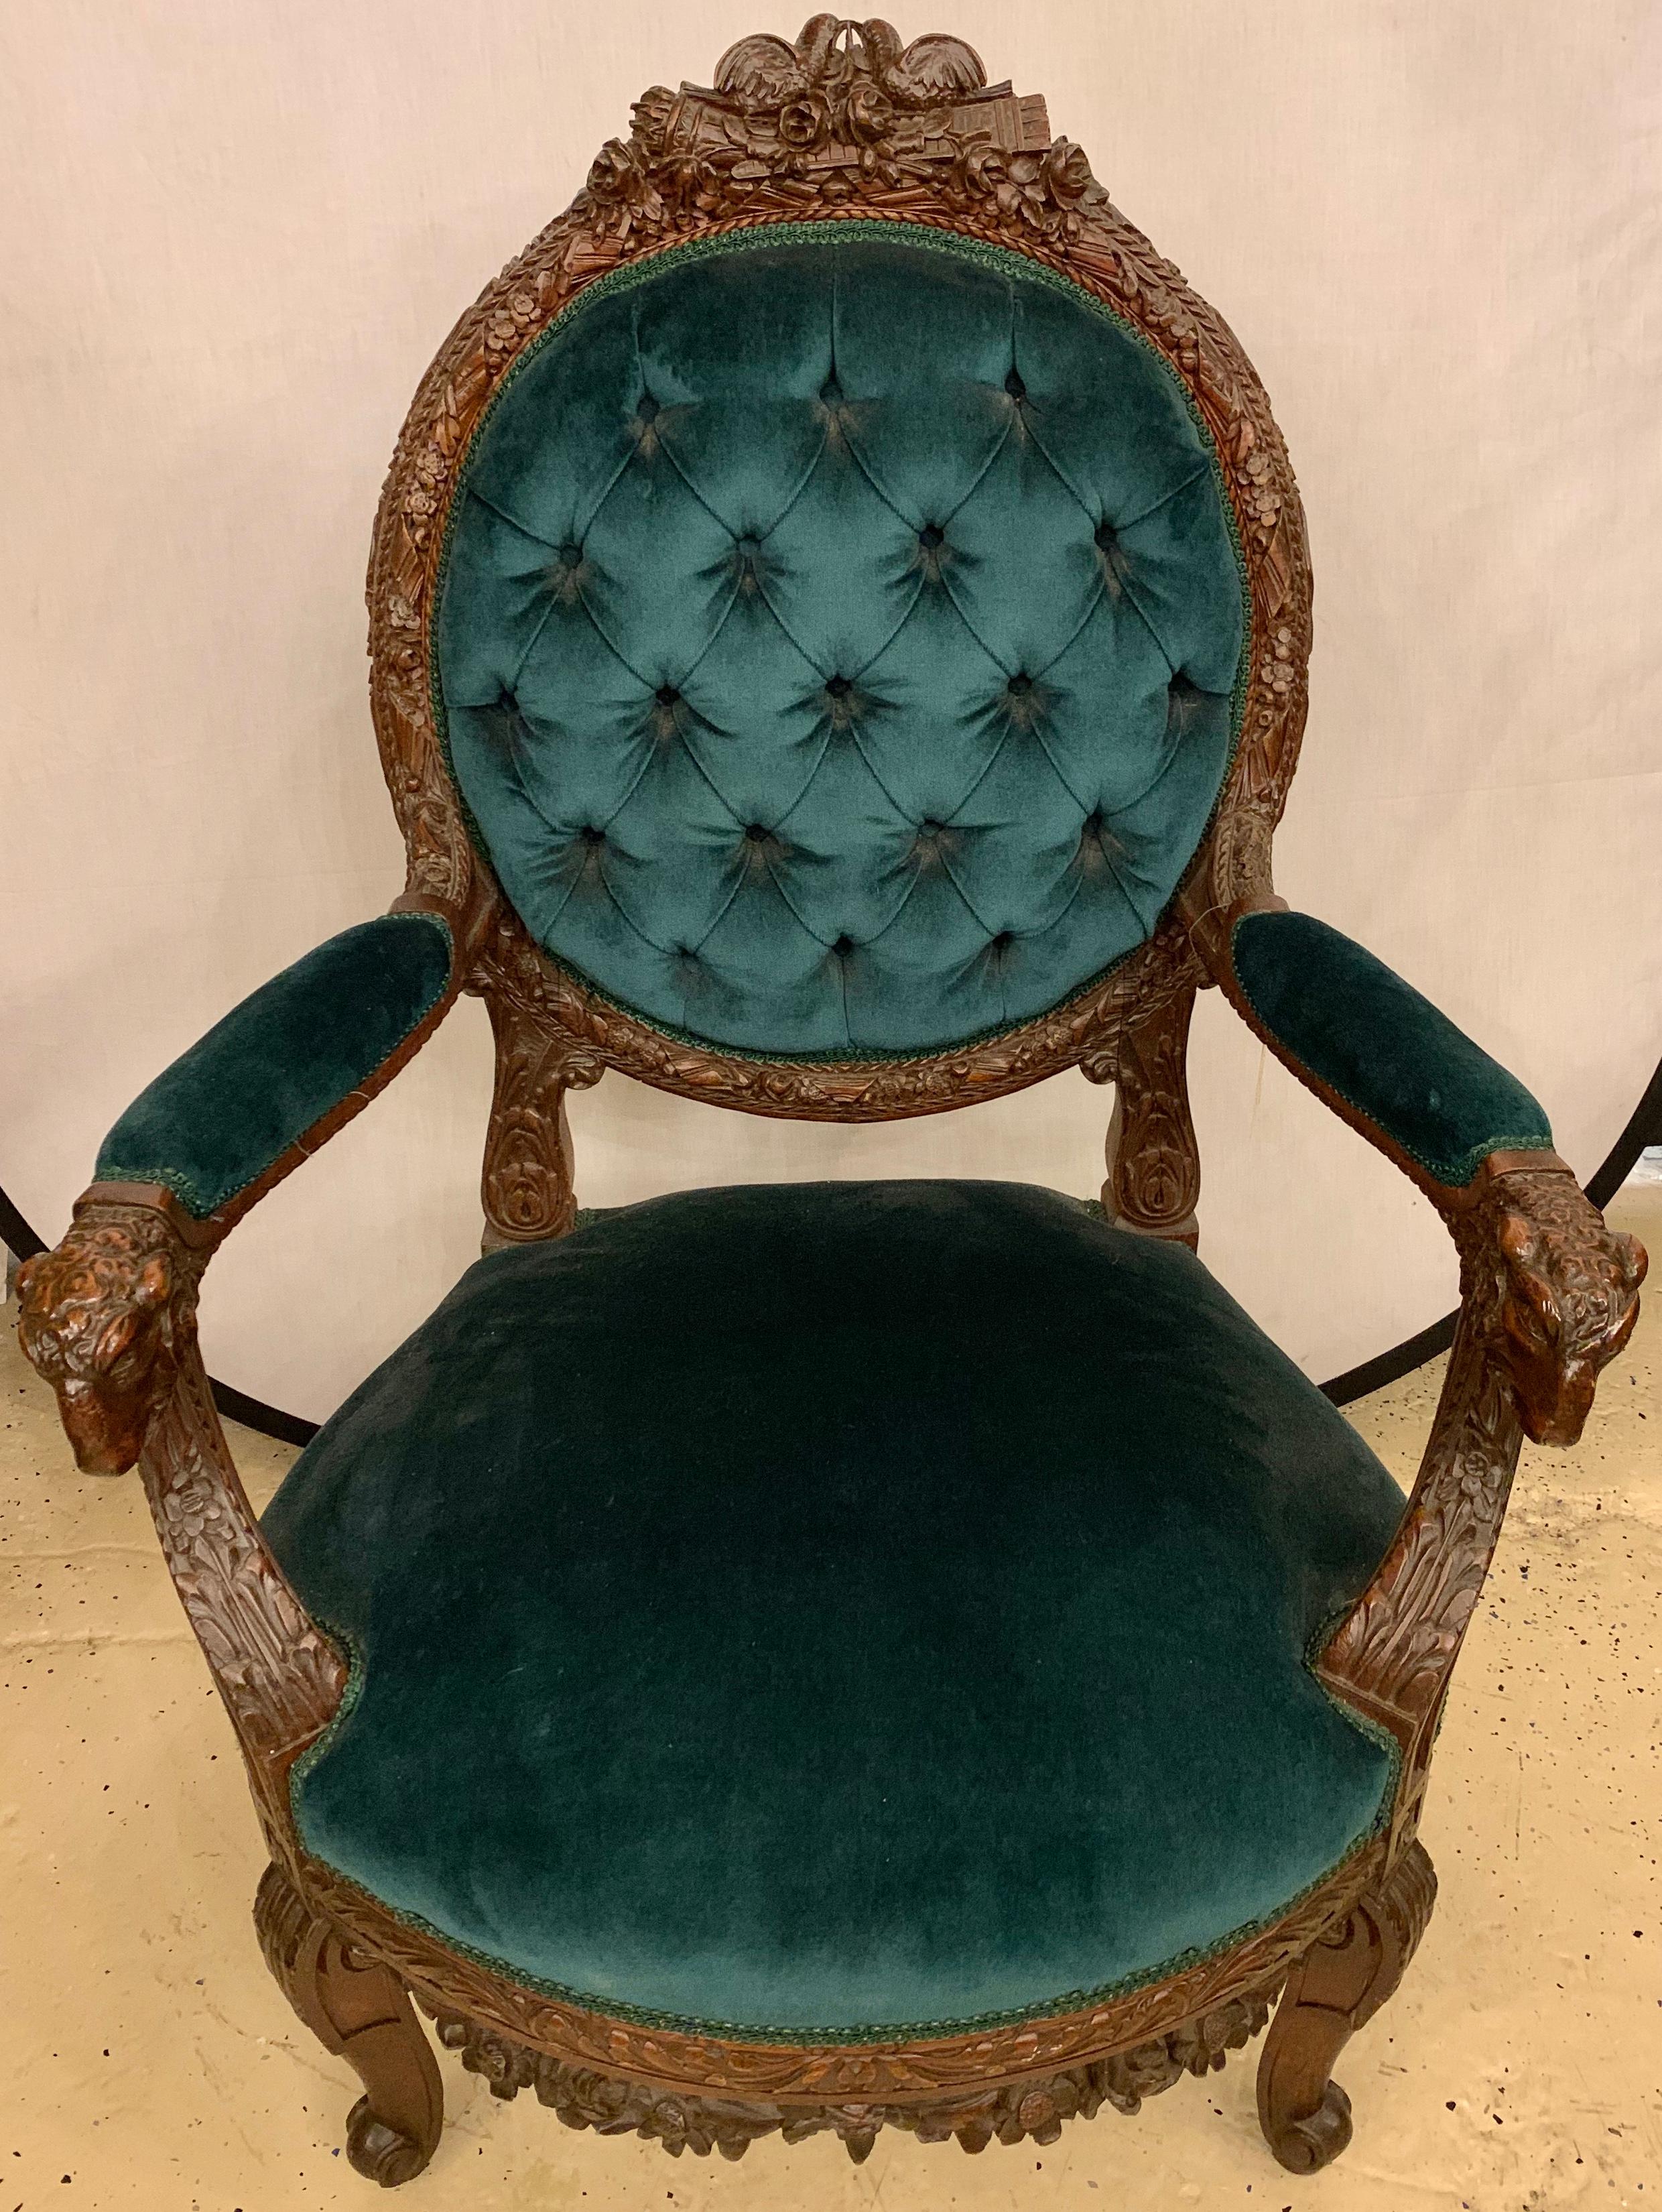 Ram’s head French armchair, cameo tufted back in a green velvet upholstery, circa 1920s. Strong and sturdy.


Greg
ZXXA/1hXA.